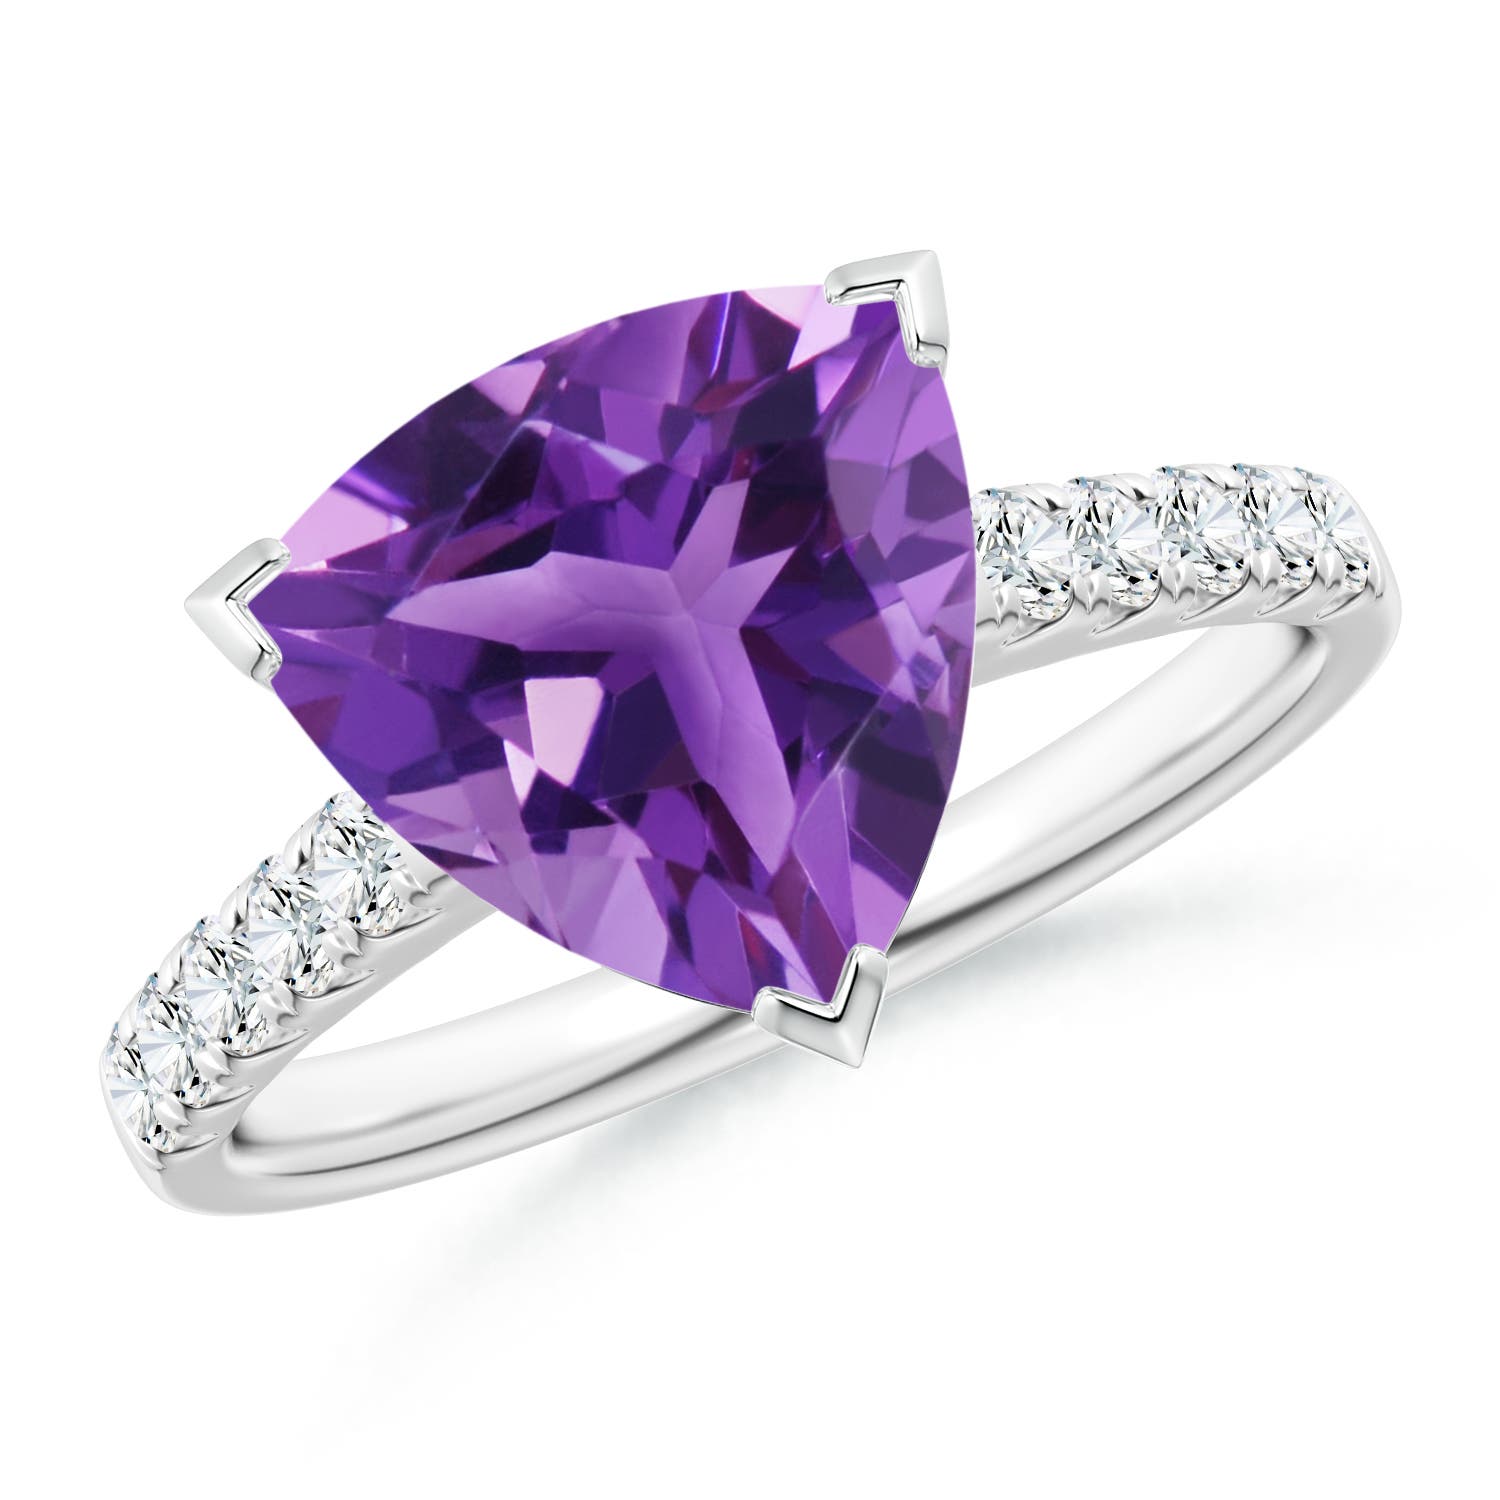 AAA - Amethyst / 2.95 CT / 14 KT White Gold